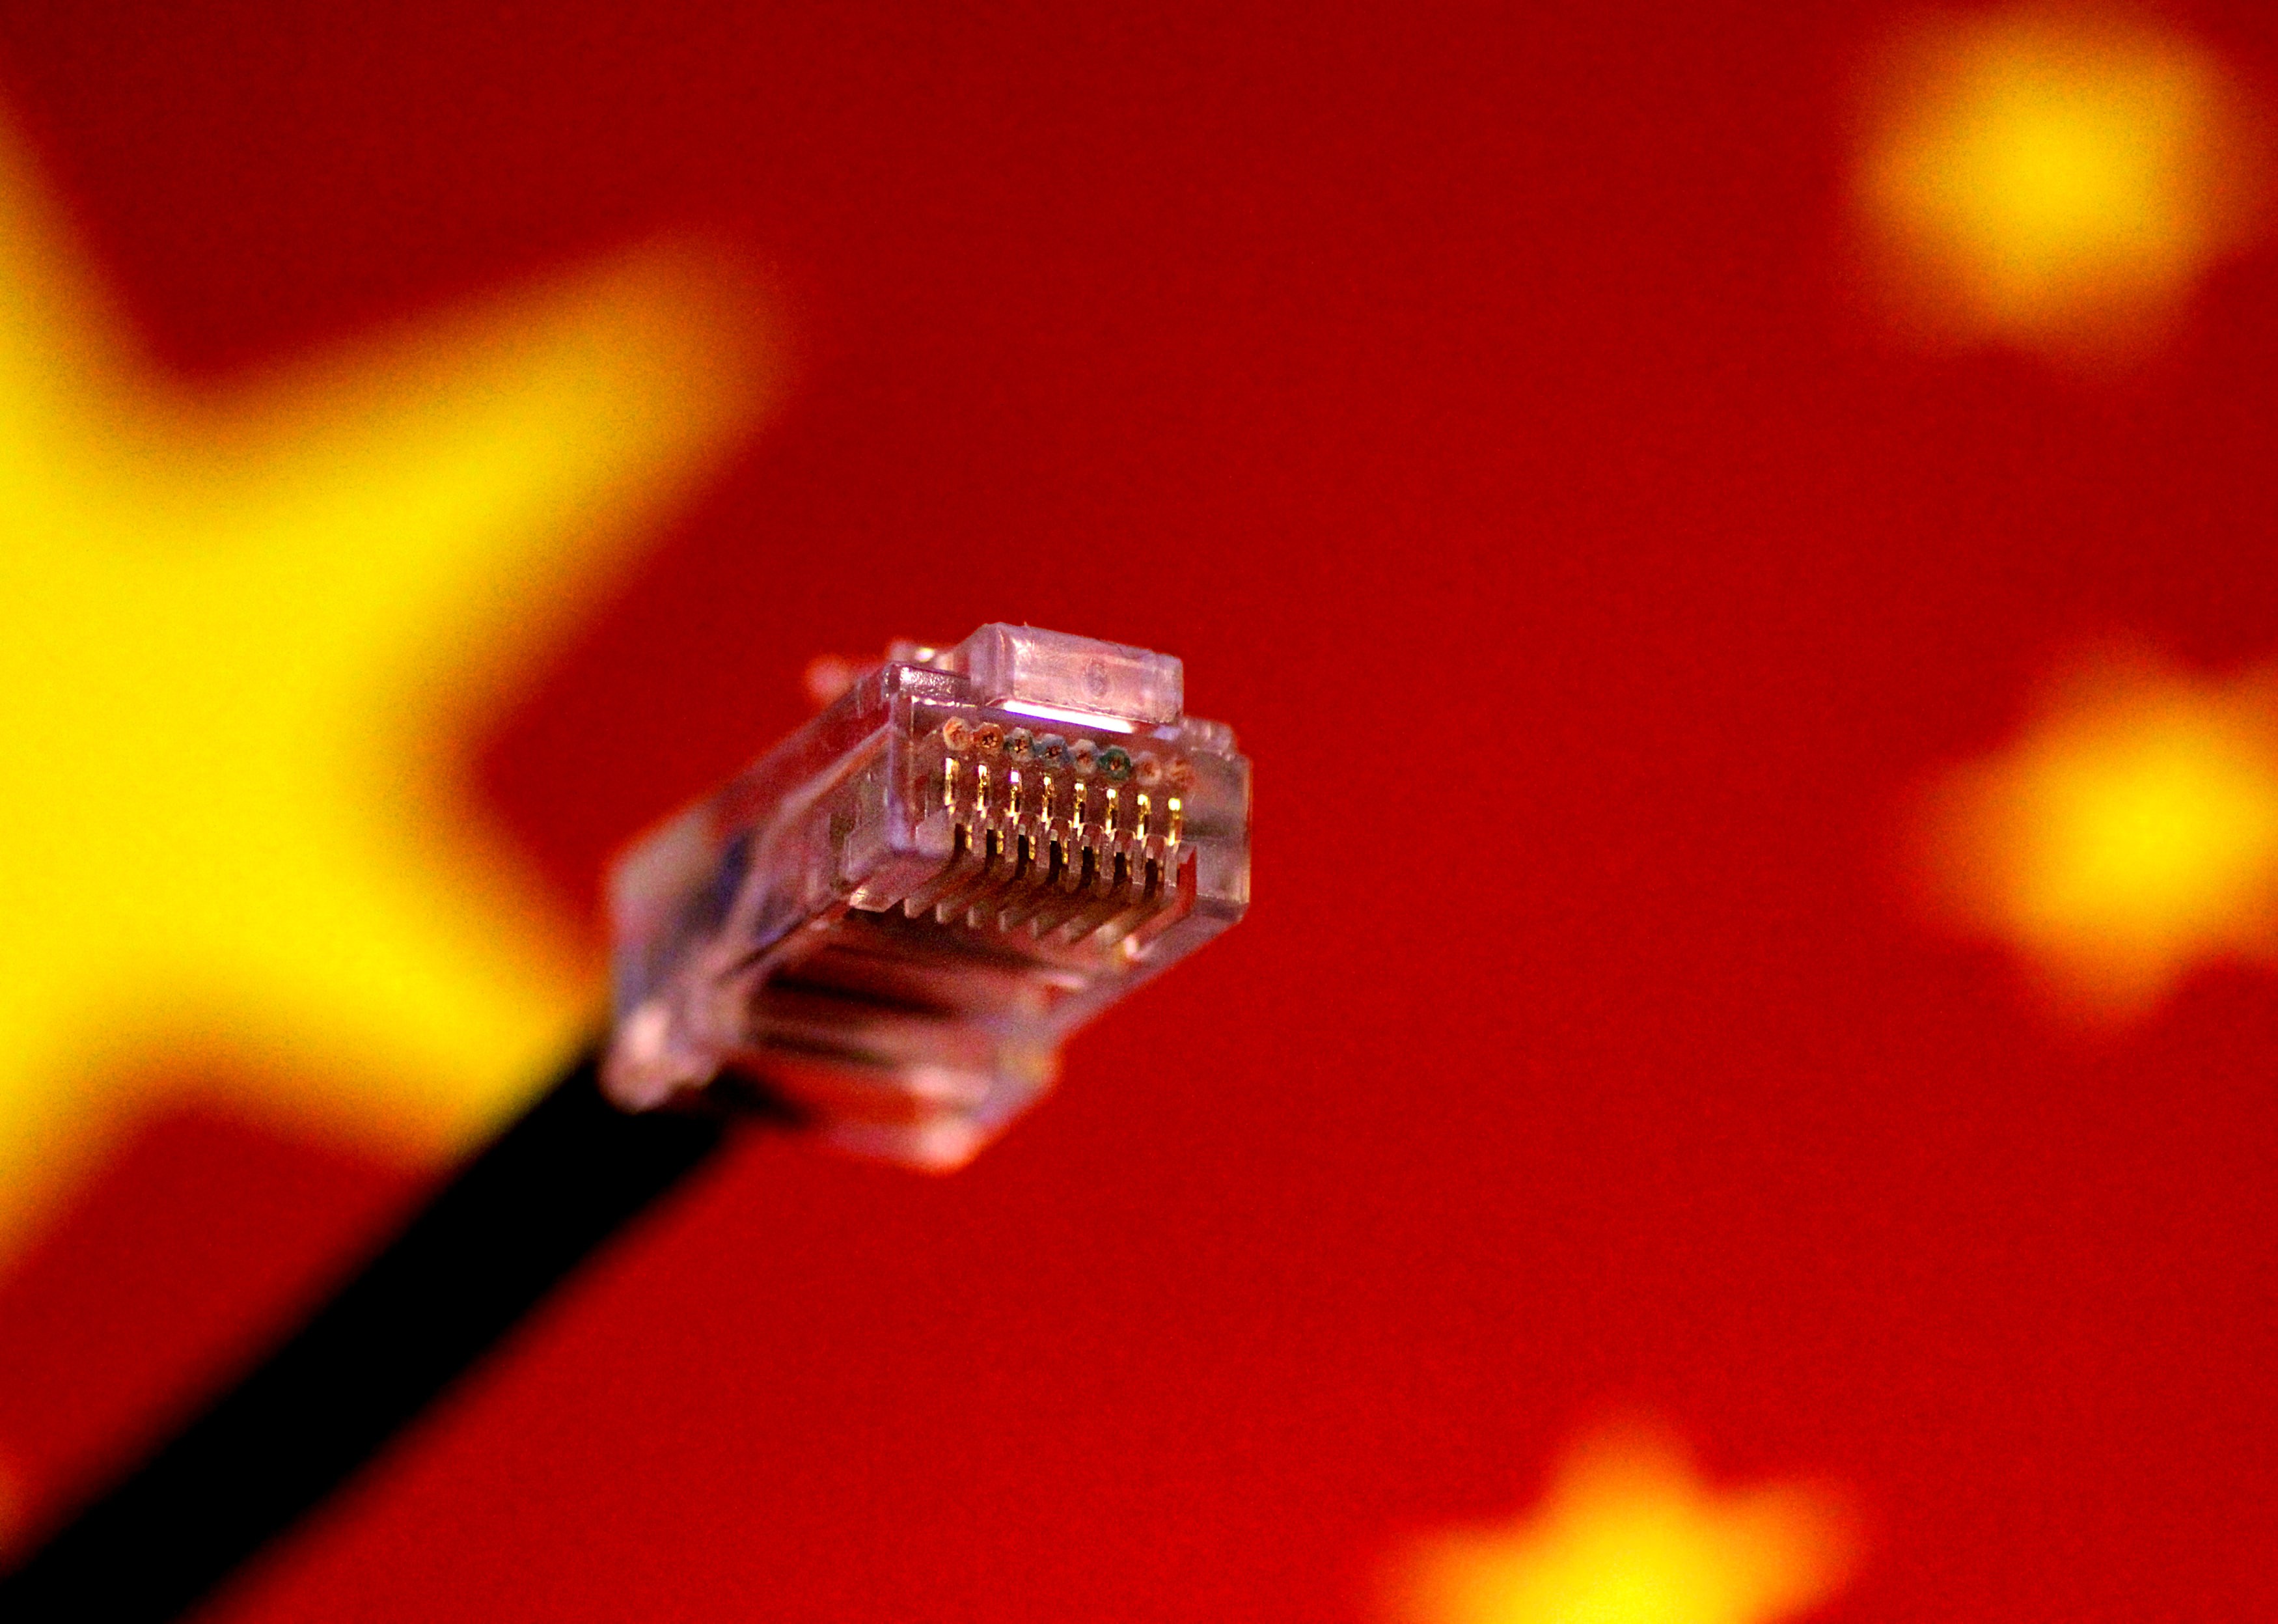 From VPNs shopped abroad to DIYs and fake US addresses, the inveterate Chinese netizen will do anything to dodge the Great Firewall